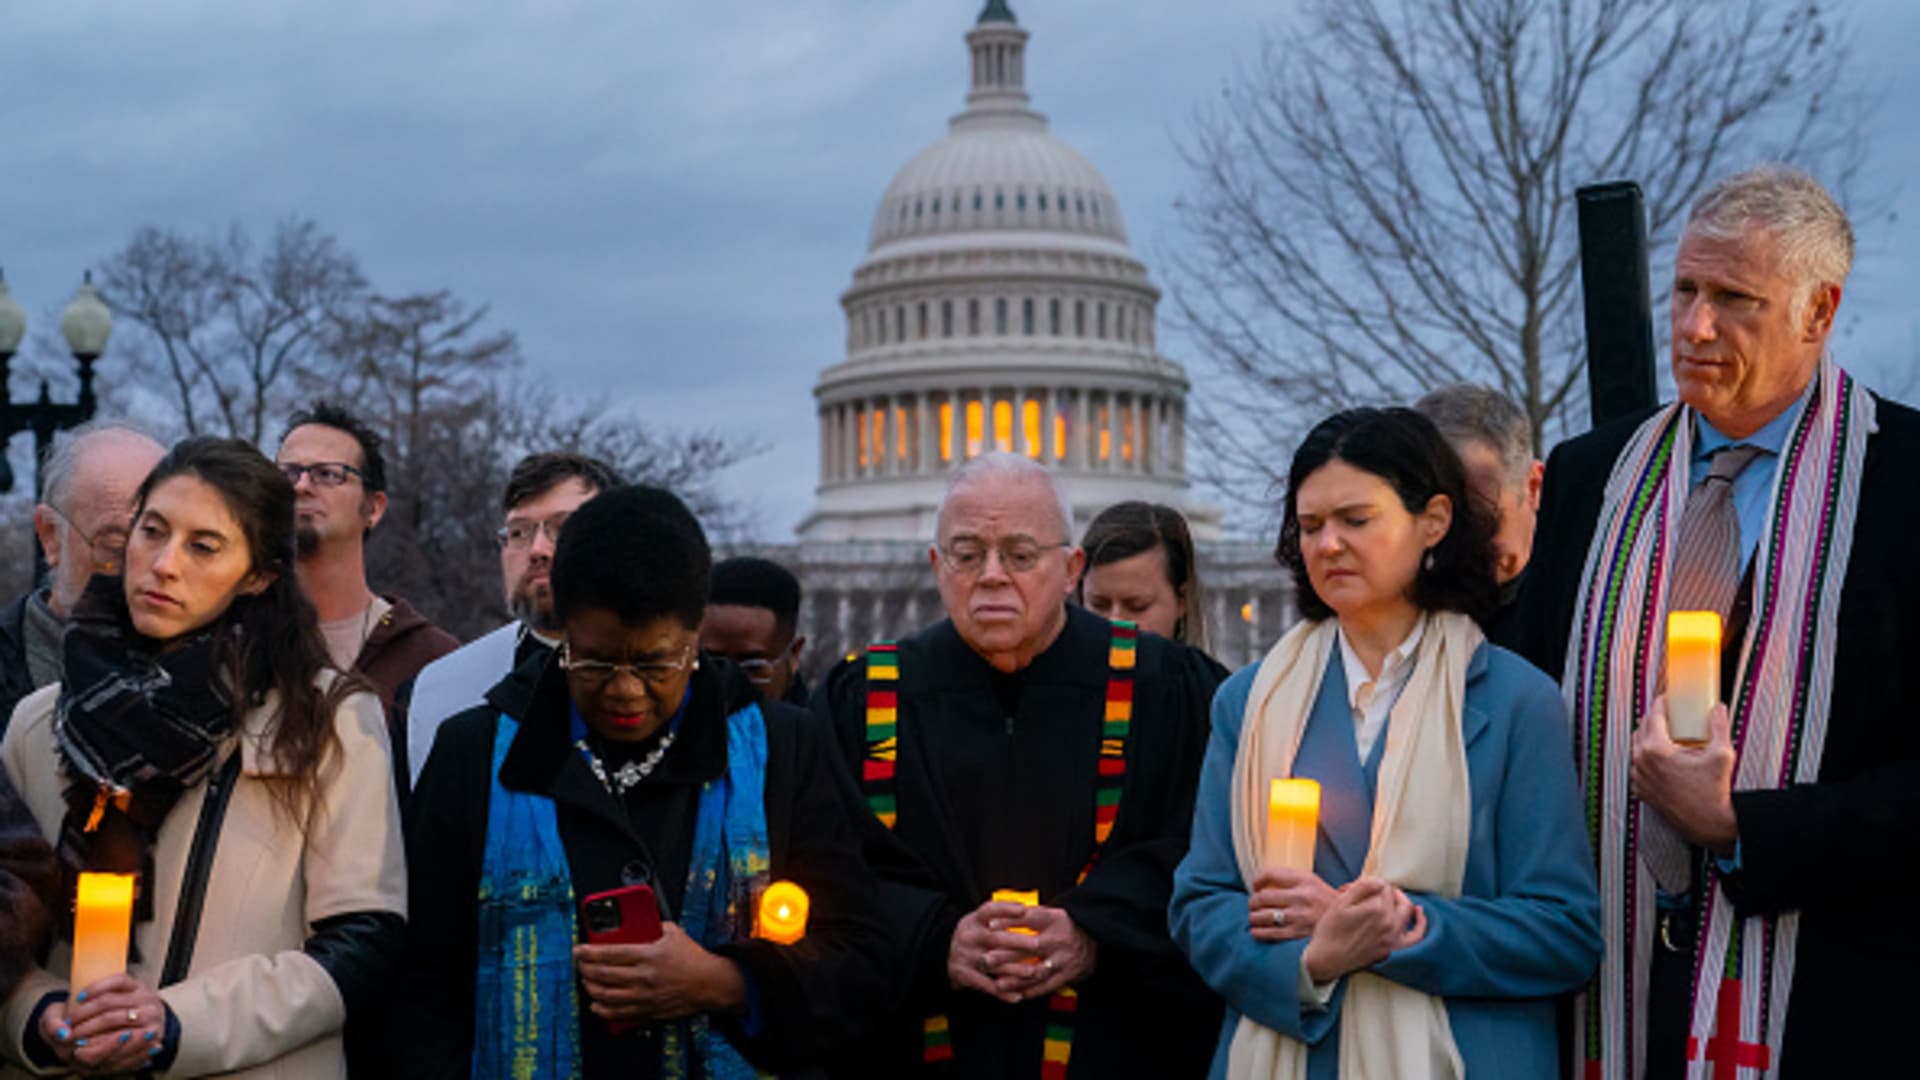 Community faith leaders gather for a prayer vigil on the second anniversary of the January 6 attack on the Capitol on January 6, 2023 in Washington, DC. Speakers called for an end to Christian nationalism and denounced political violence.